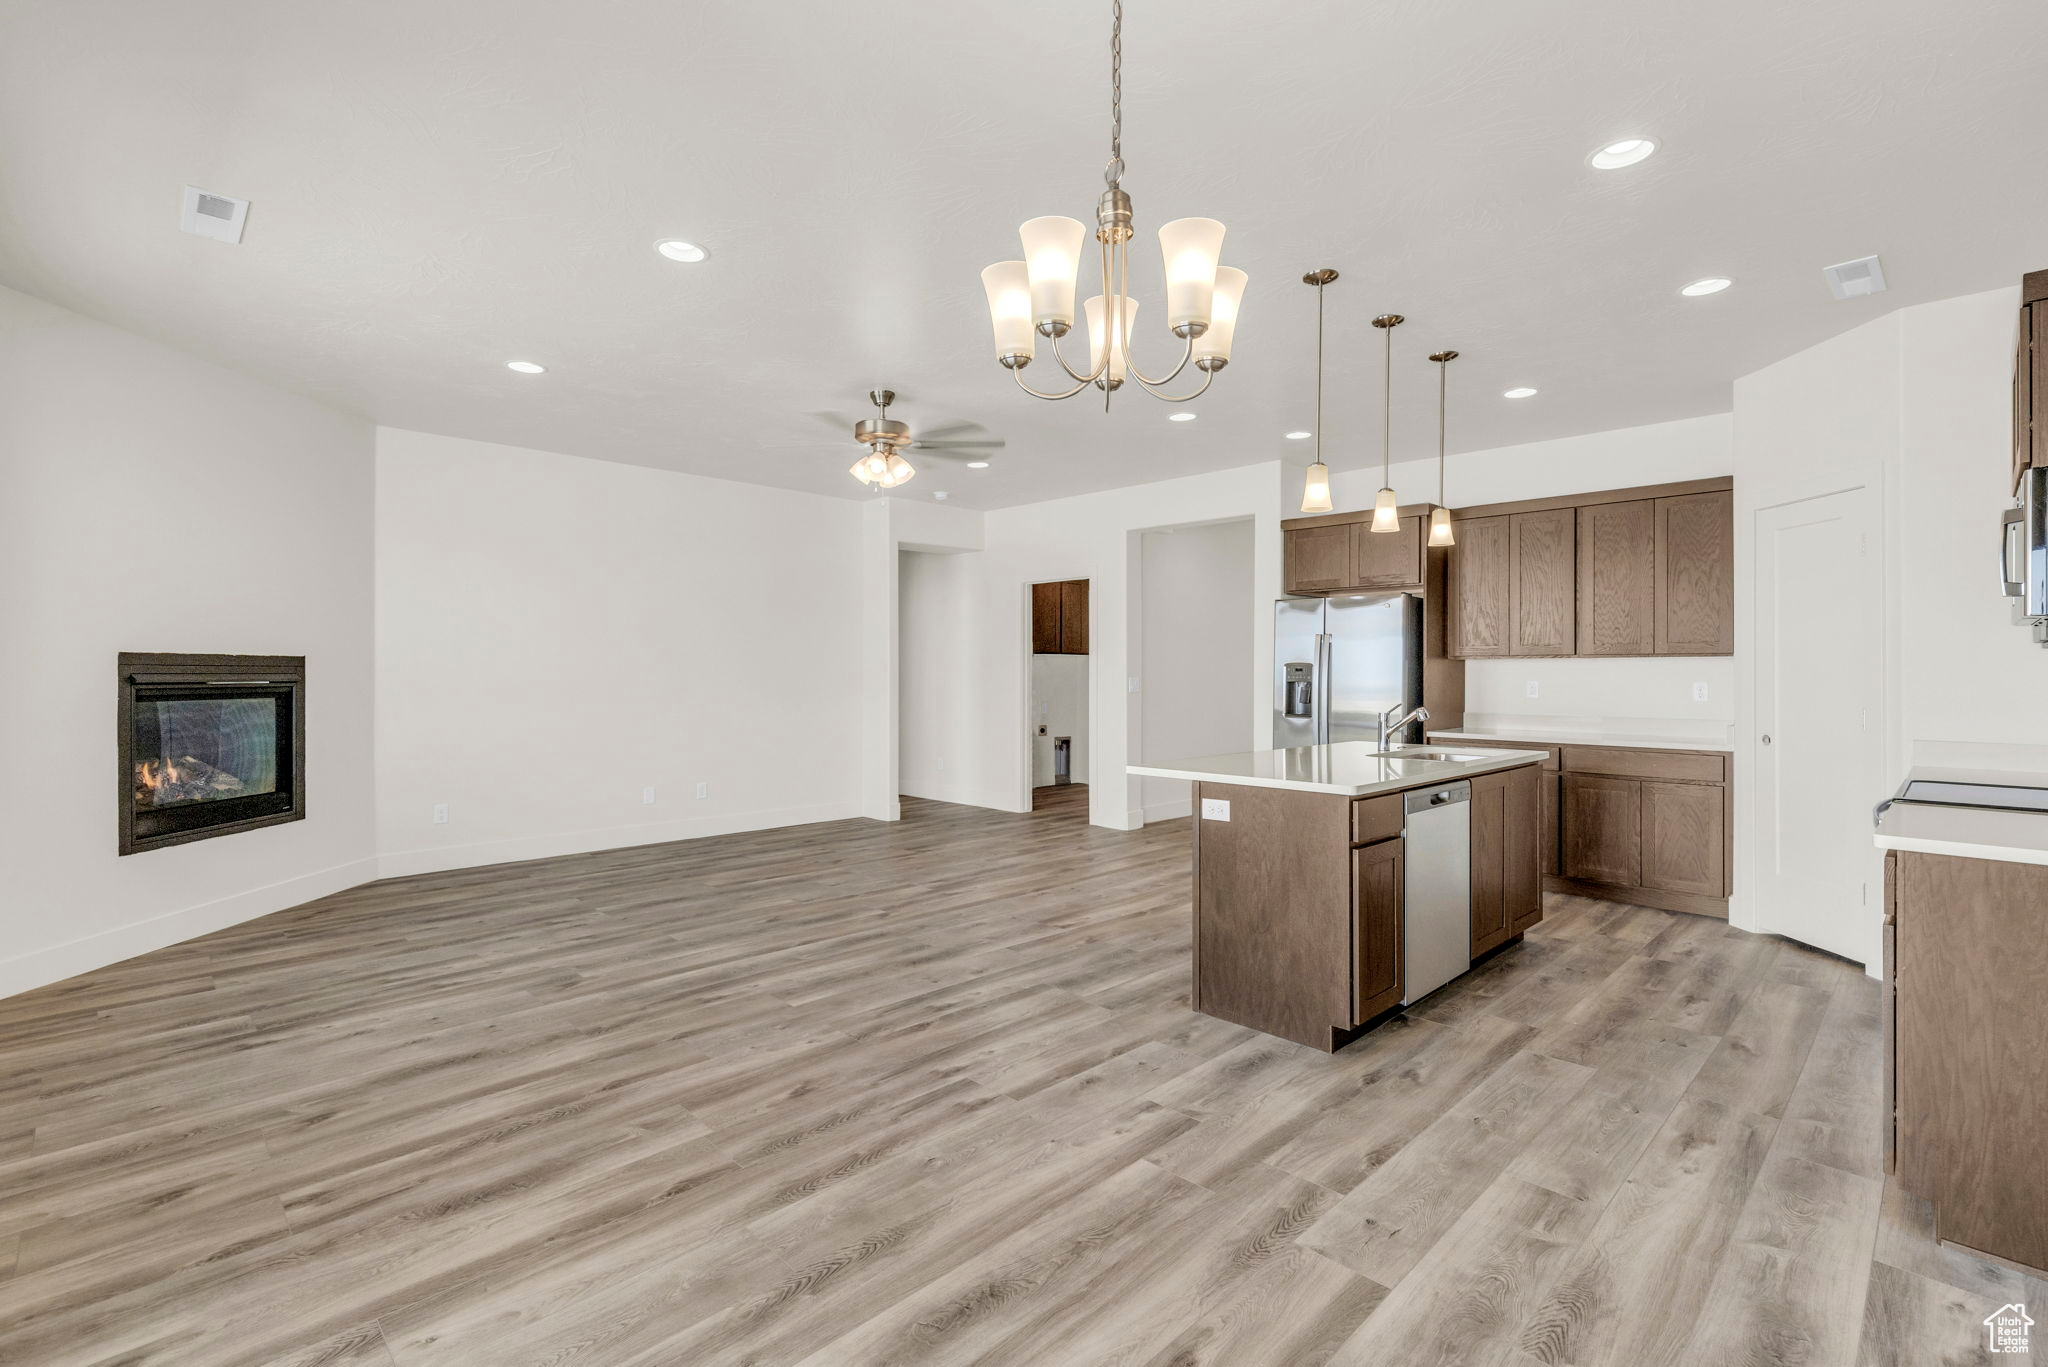 Kitchen with ceiling fan with notable chandelier, stainless steel appliances, hanging light fixtures, light hardwood / wood-style floors, and an island with sink